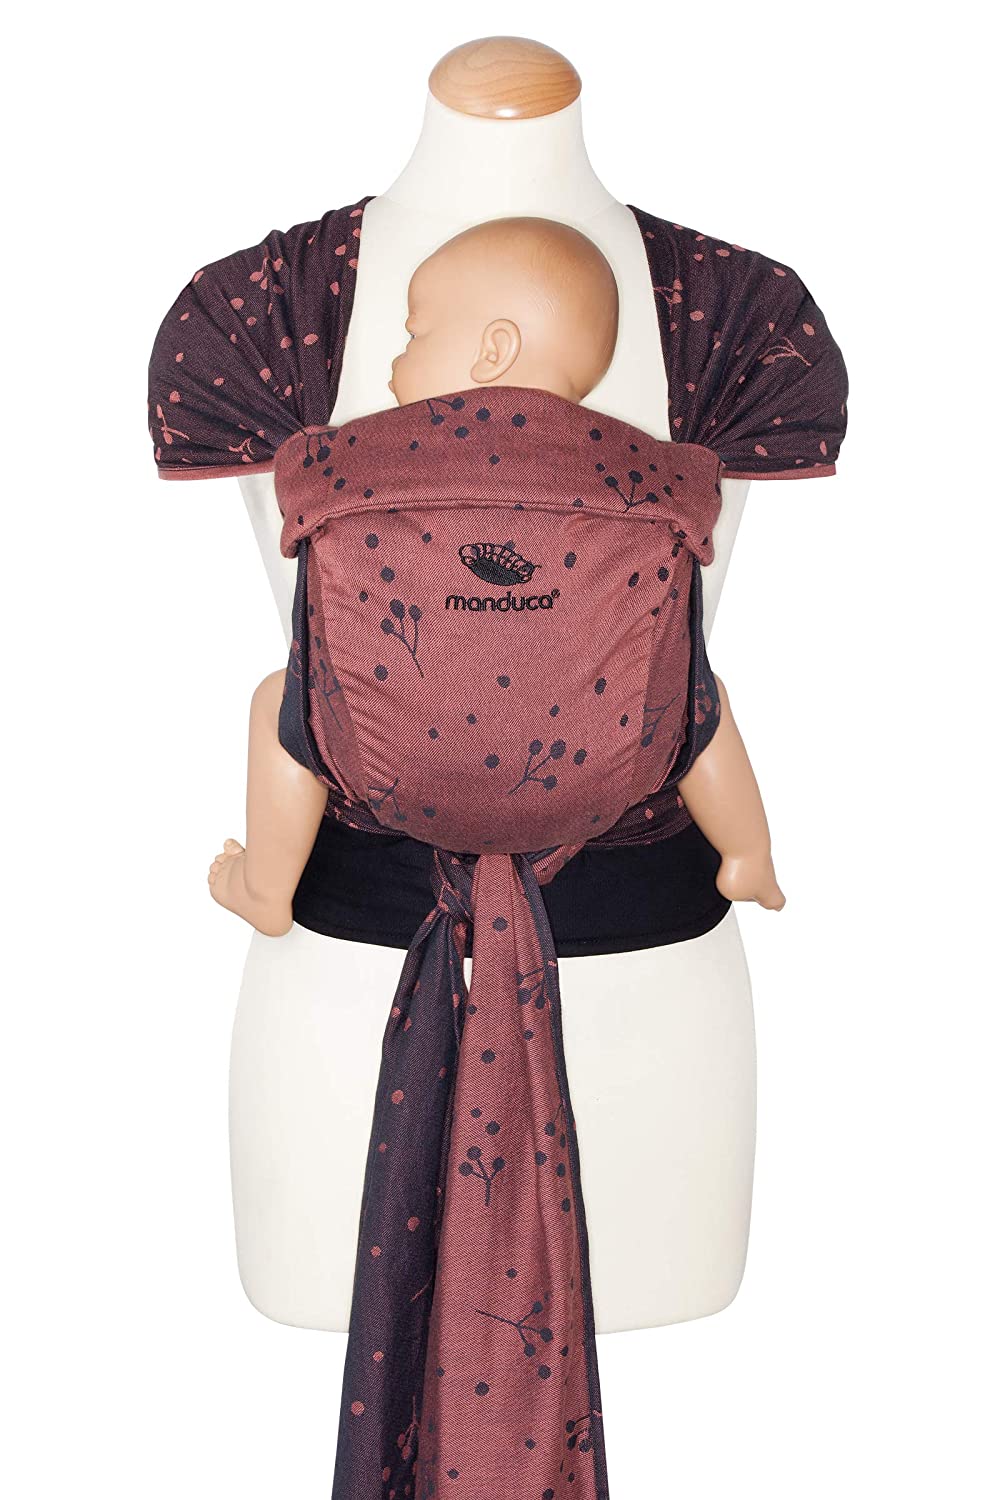 manduca Twist Baby Carrier > Craspedia Rouge < Newborn Carrier Made of Sling Fabric (Organic Cotton/Jaquard Woven), Soft Waist Belt with Buckle, Fan and Tie Straps, Red